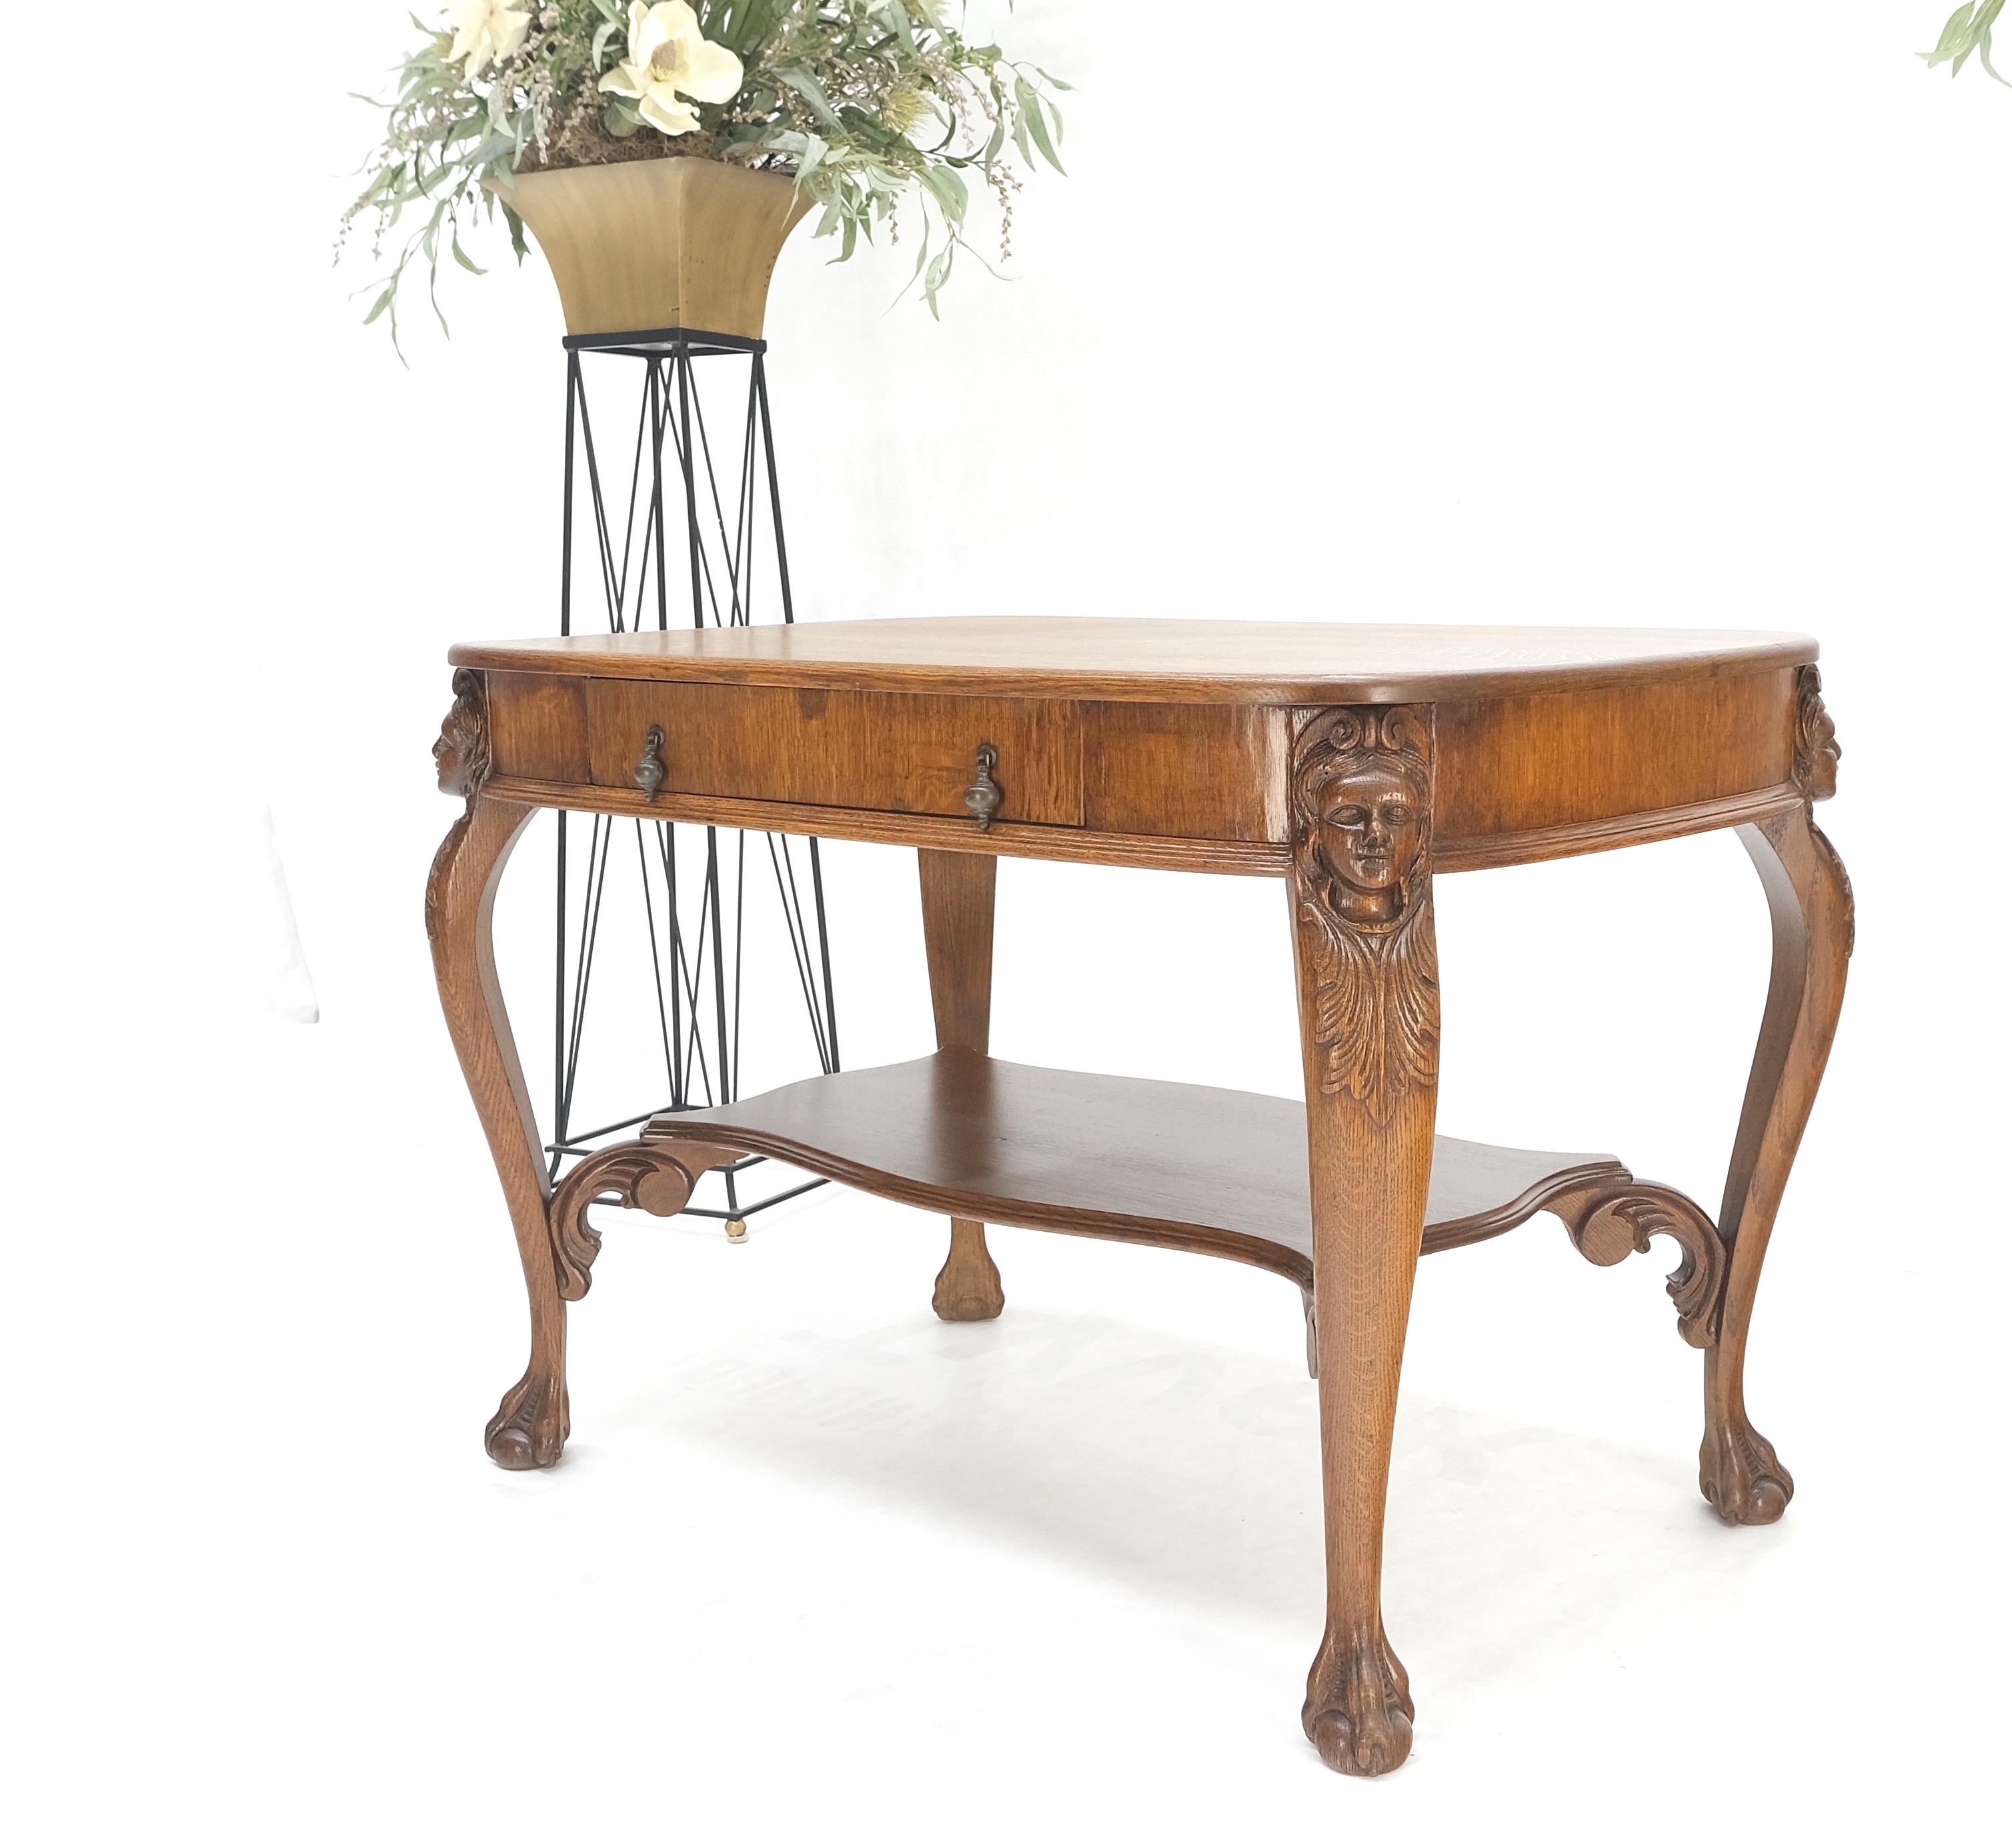 Art Nouveau Style Carved Faces Ball & Claw Feet Rounded Oak Desk Writing Table For Sale 1